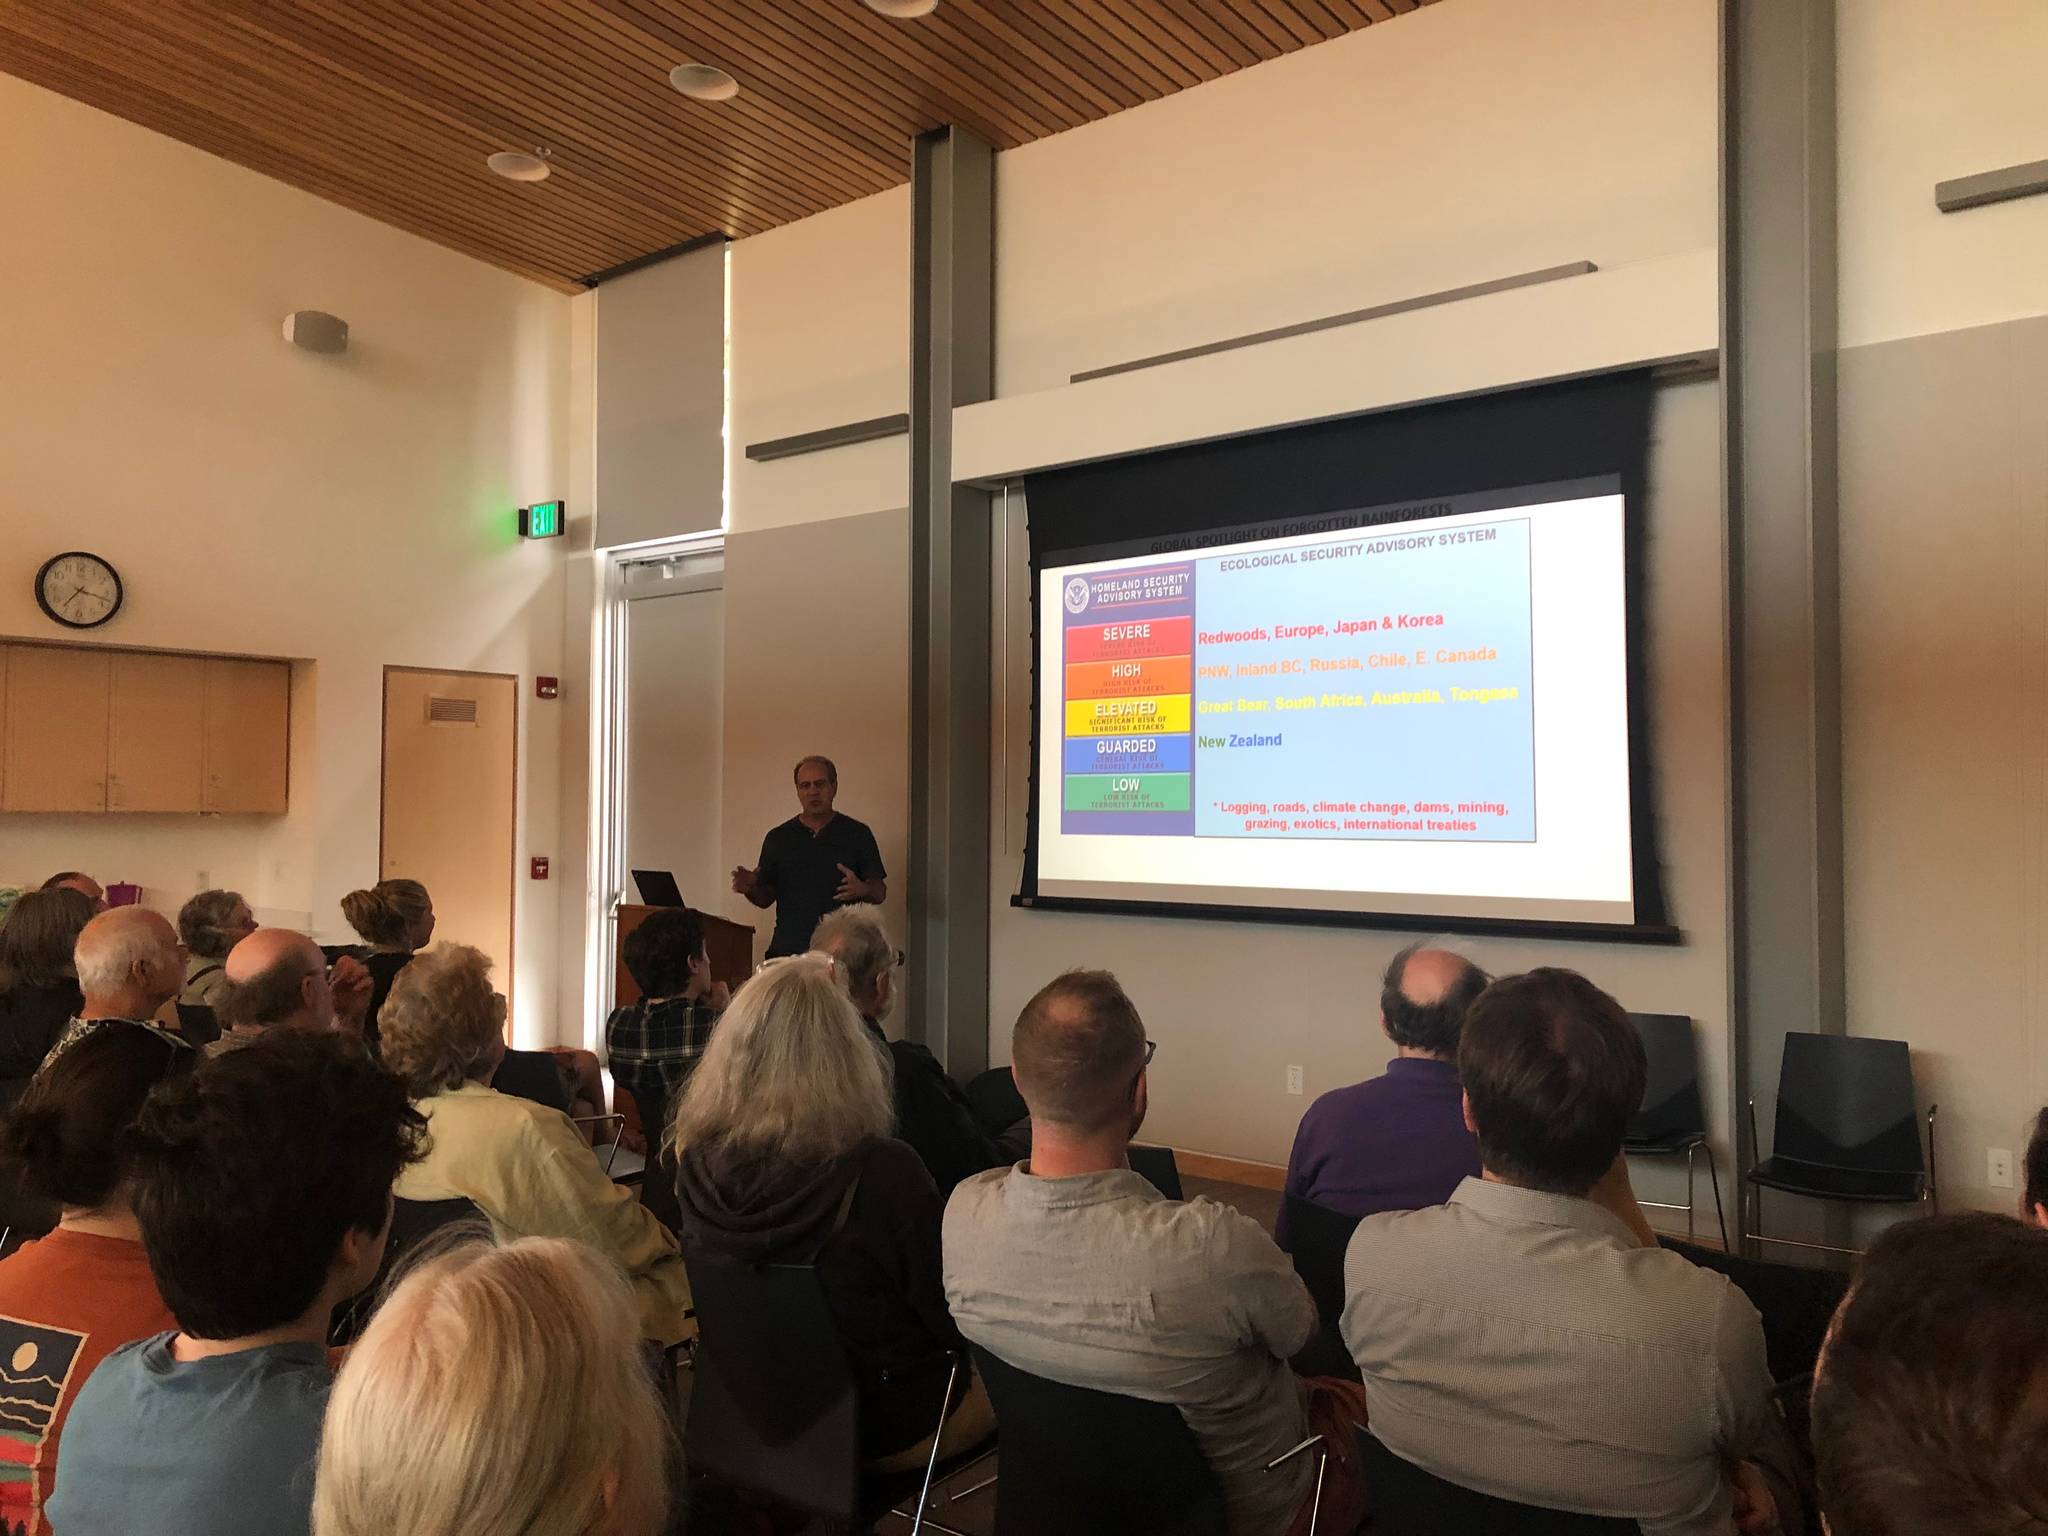 Dominick DellaSala, Ph.D. shows a slide depicting a warning level rating he created for forests based off the Transportation Security Administration’s rating system used at airports on Aug. 13, 2019. (Peter Segall | Juneau Empire)